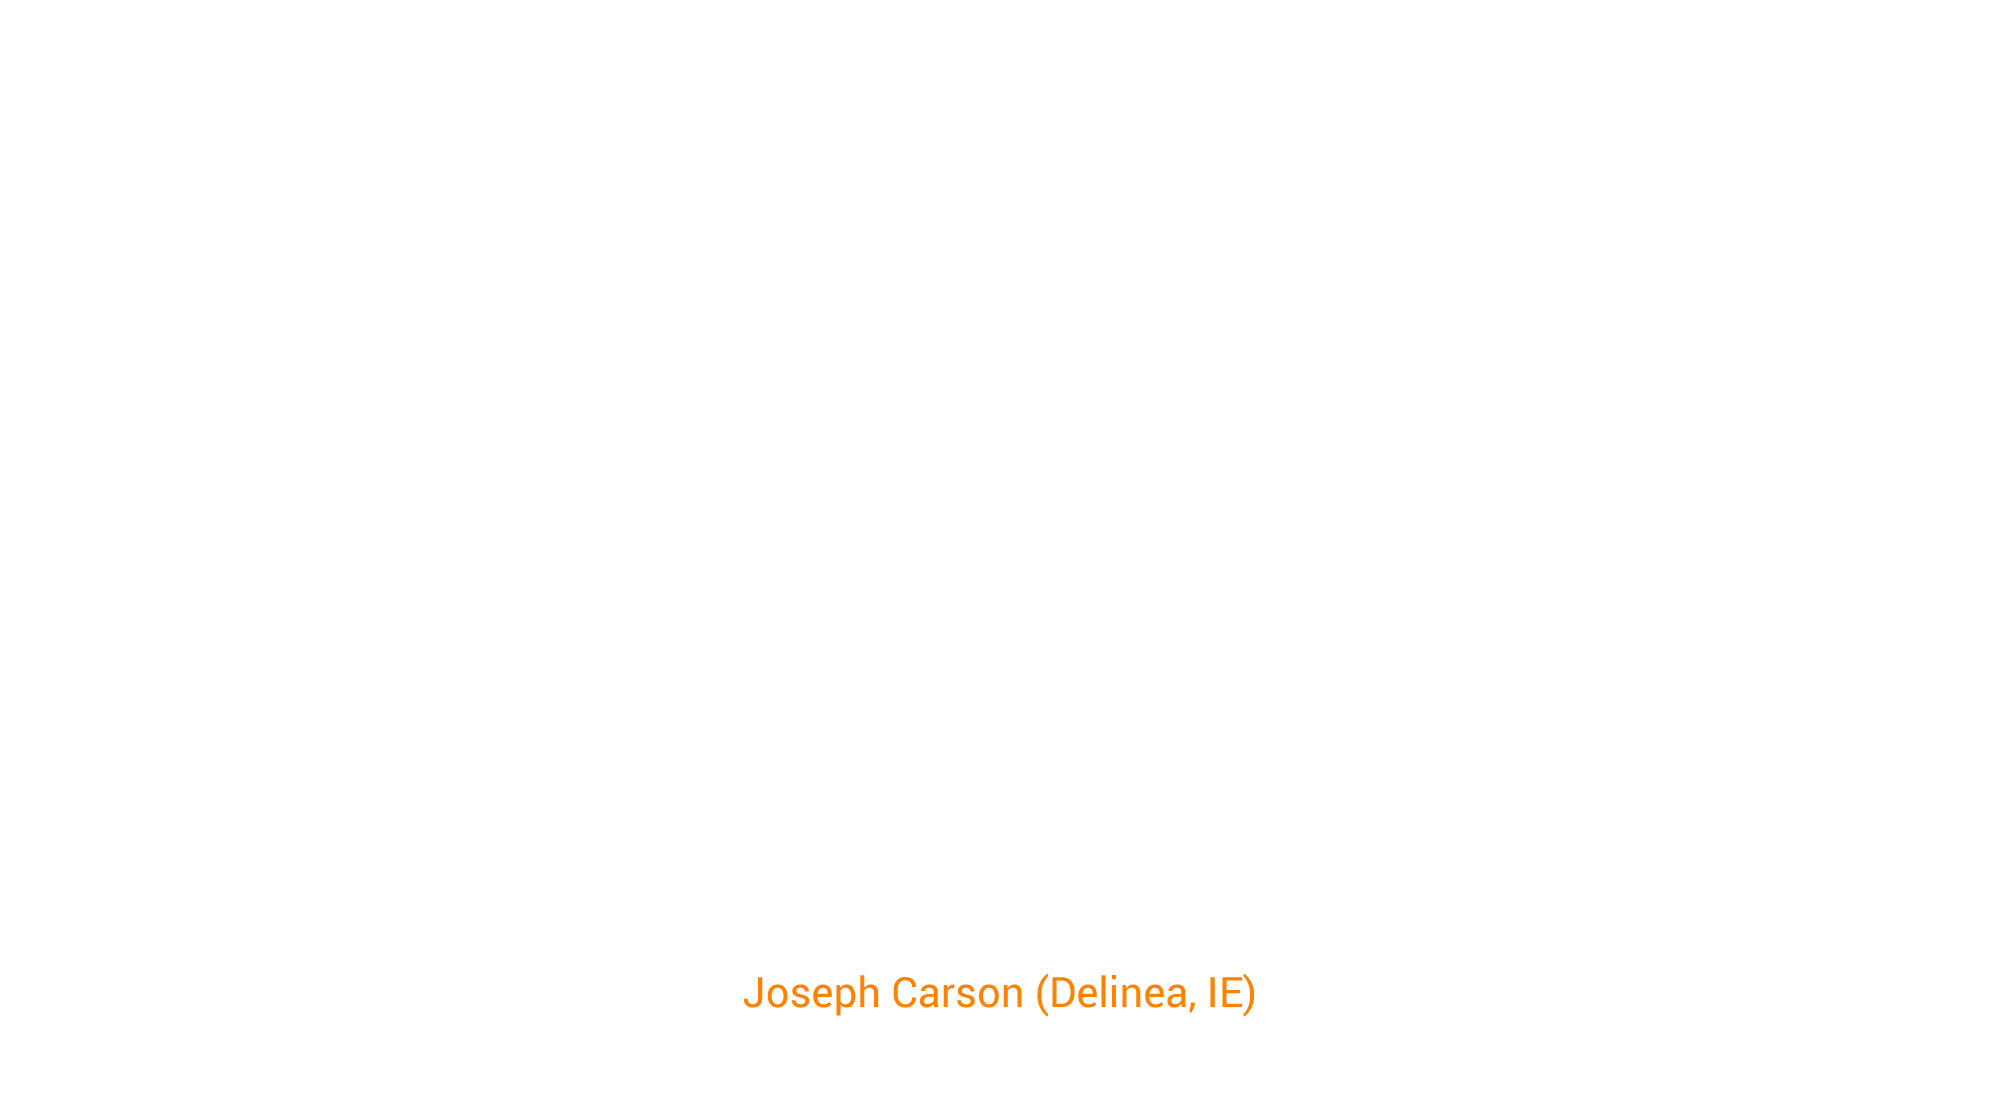 Ransomware Incident Response - The Real-World Story of a Ransomware Attack